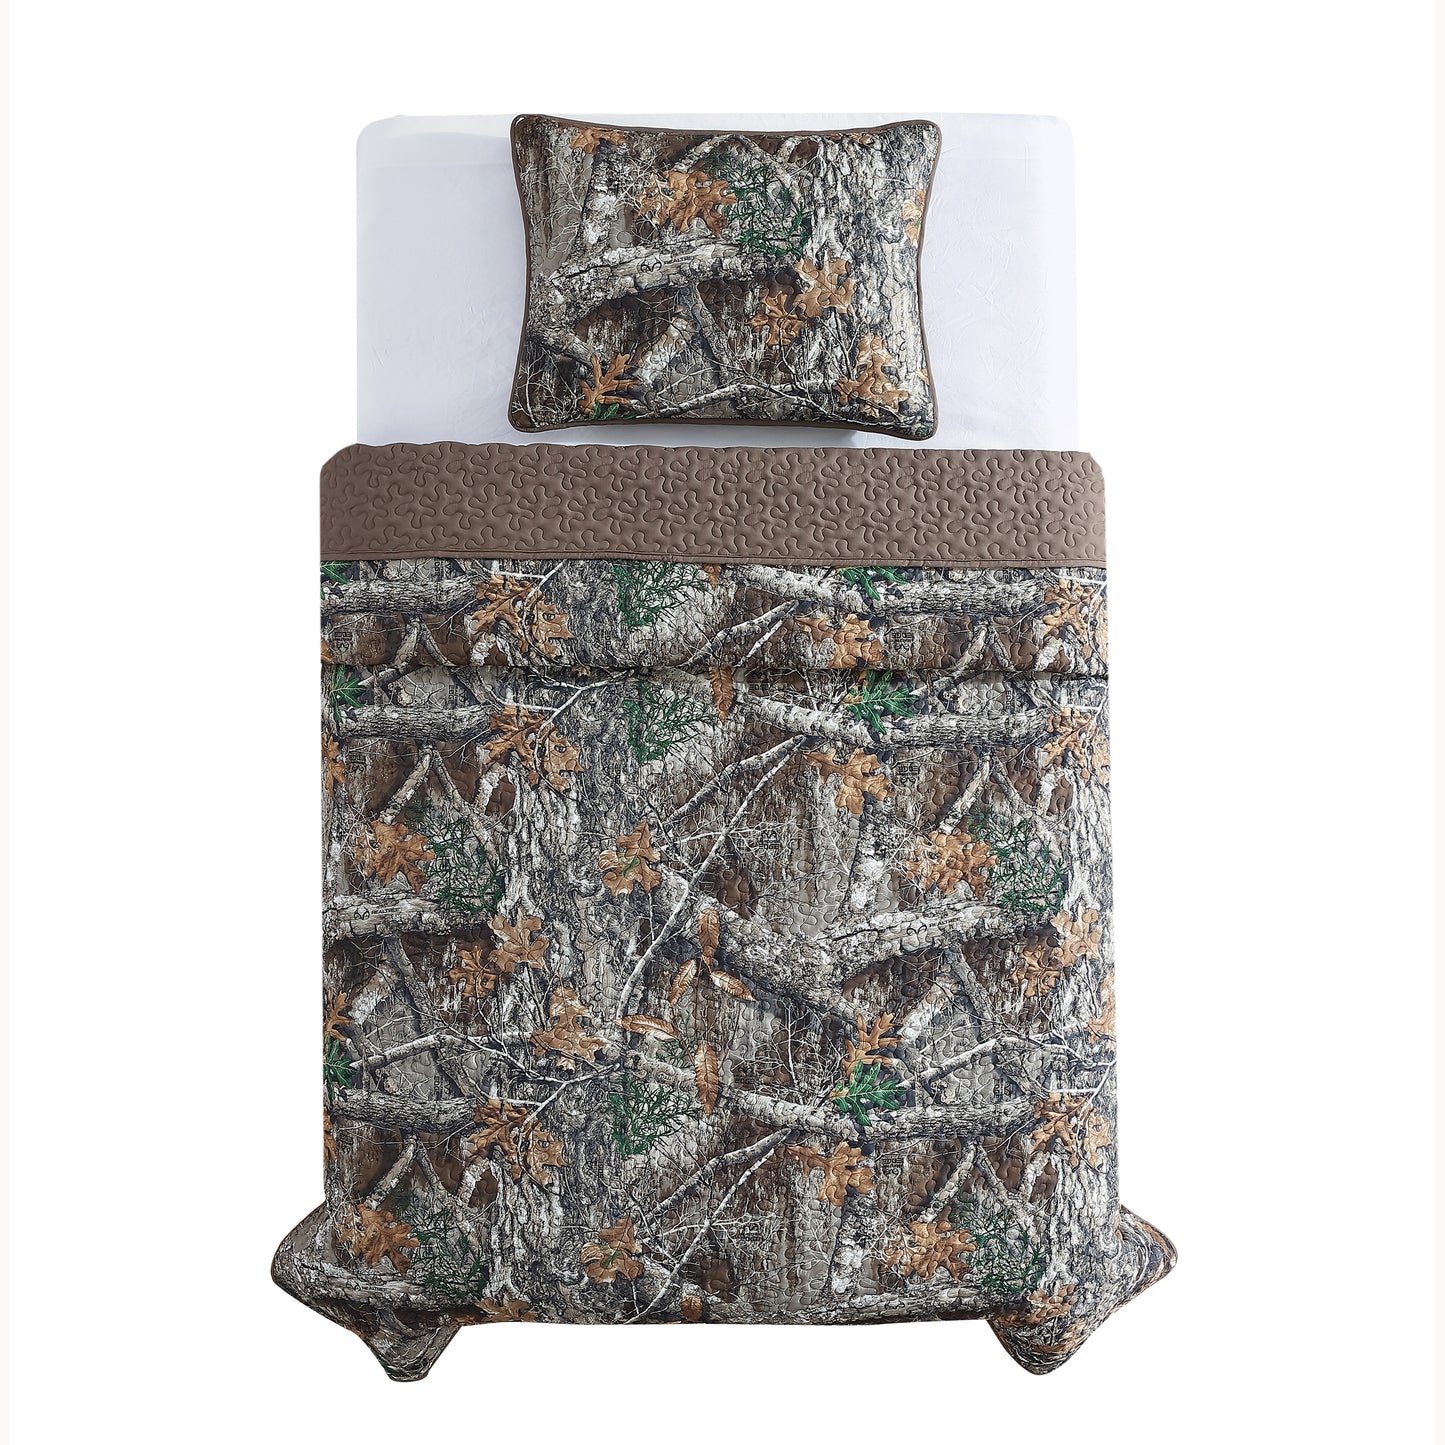 Realtree Edge Camouflage Quilt Set